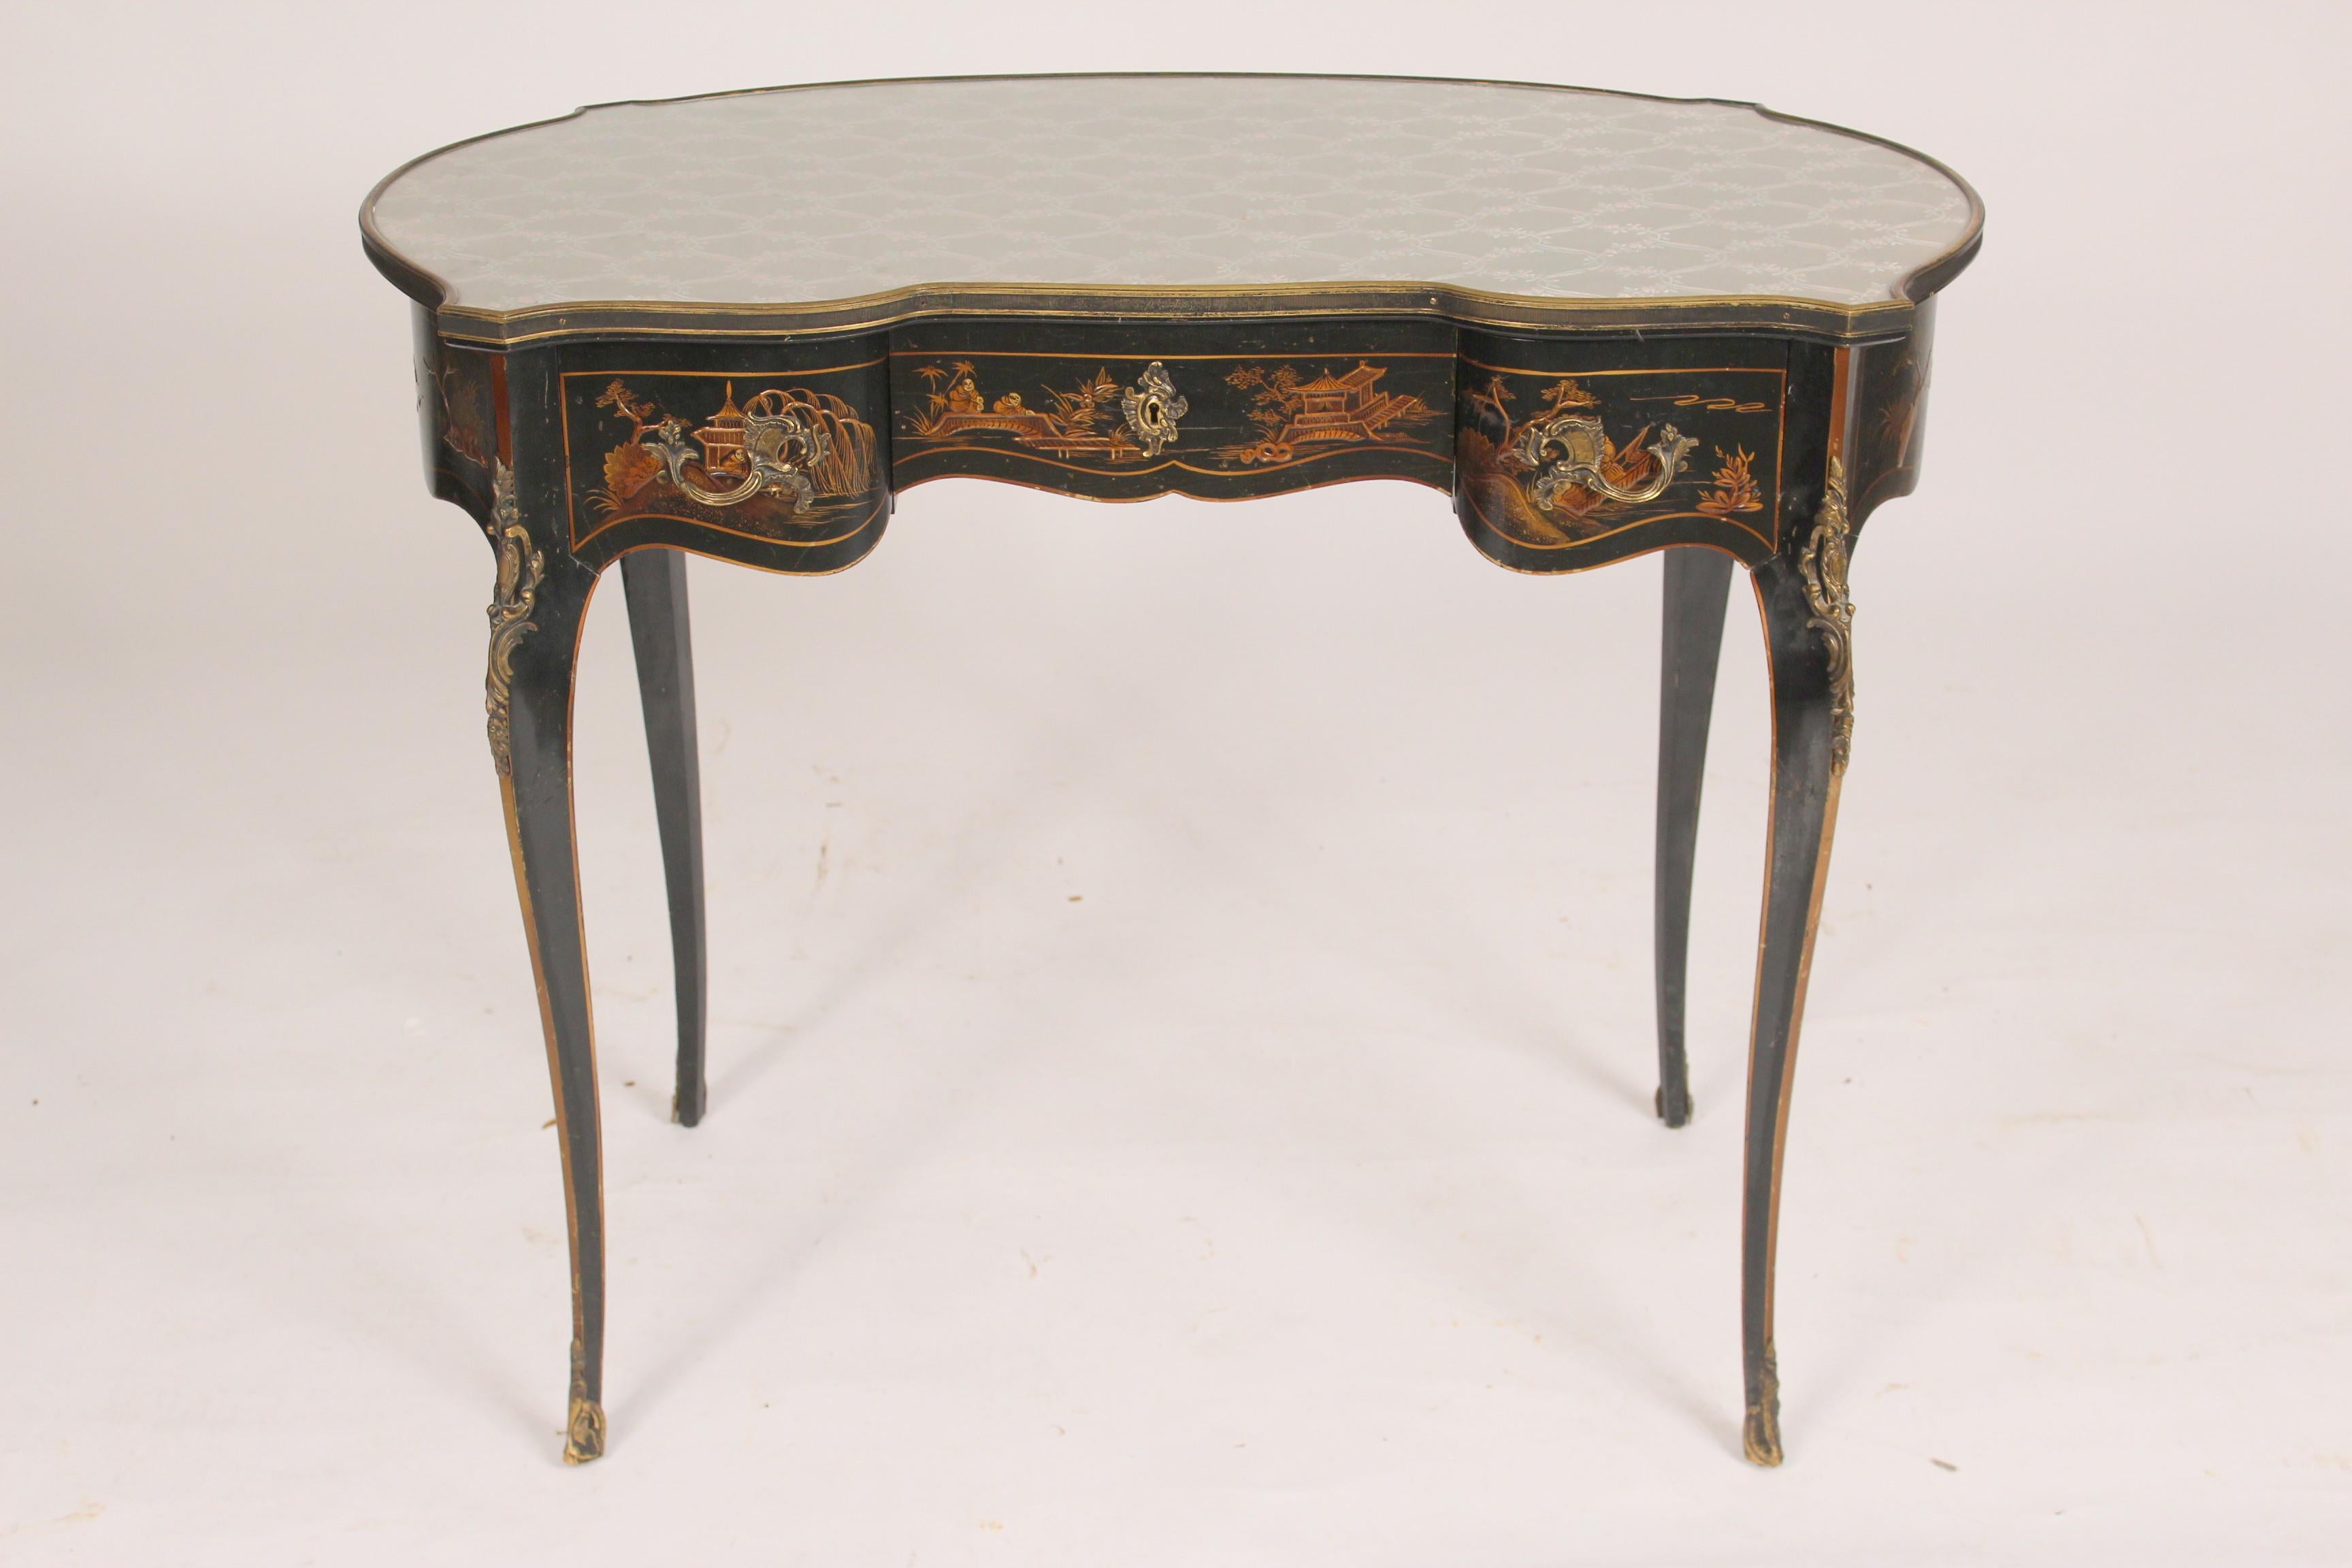 Louis XV style black chinoiserie decorated vanity / desk, circa 1970's. With a fabric and glass top, raised chinoiserie decoration and brass hardware.